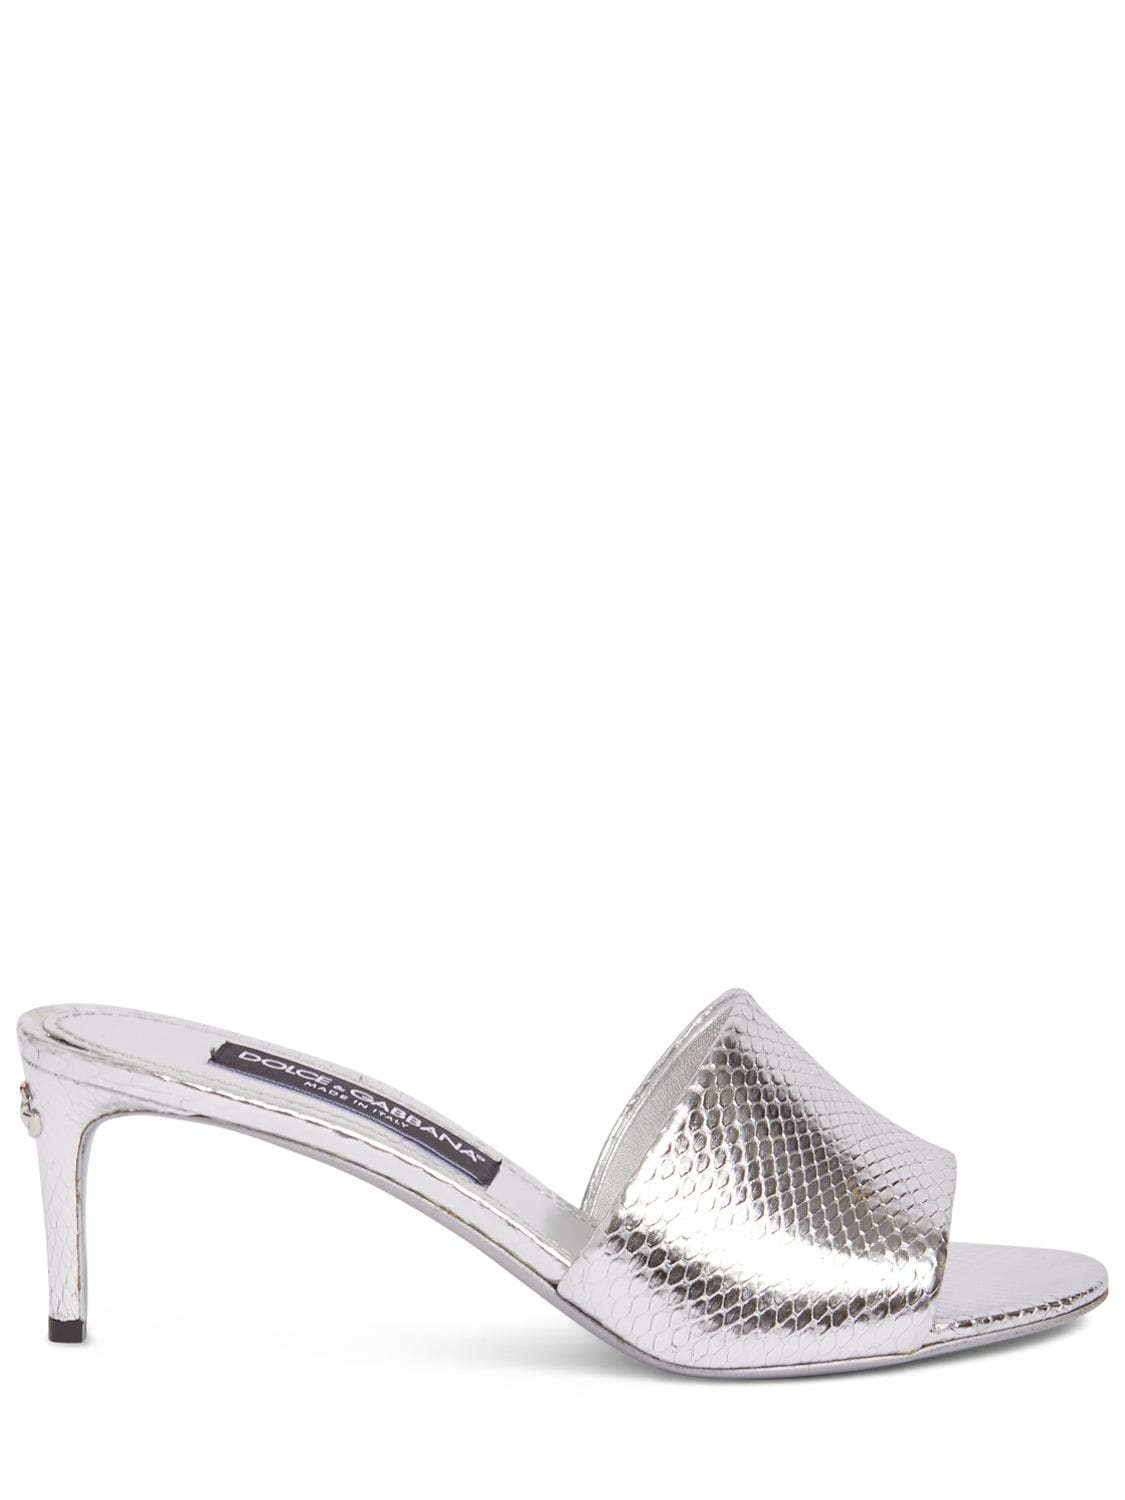 Dolce & Gabbana 105mm Keira Python Leather Mules In Silber